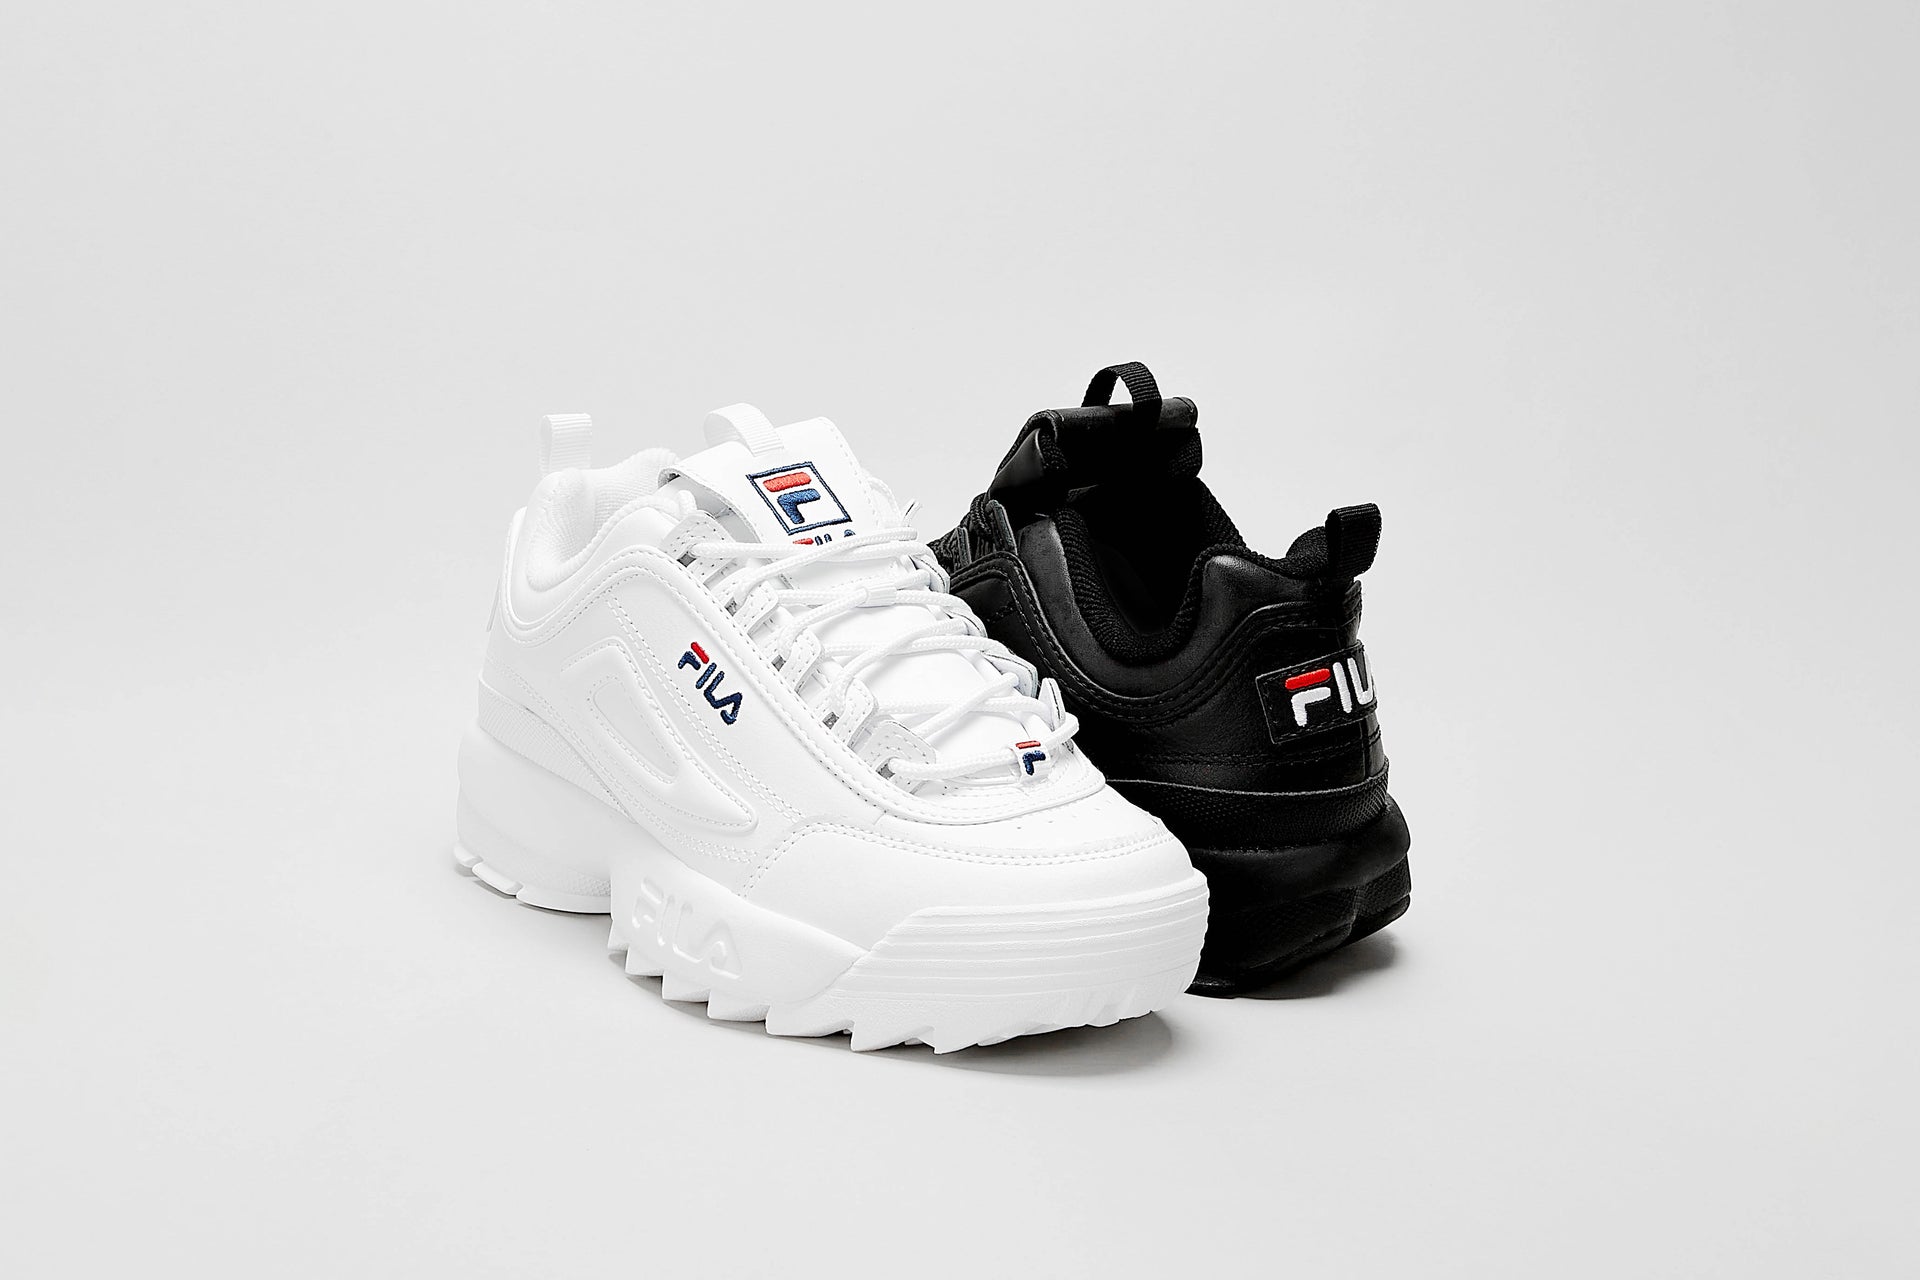 The Complete History of Fila